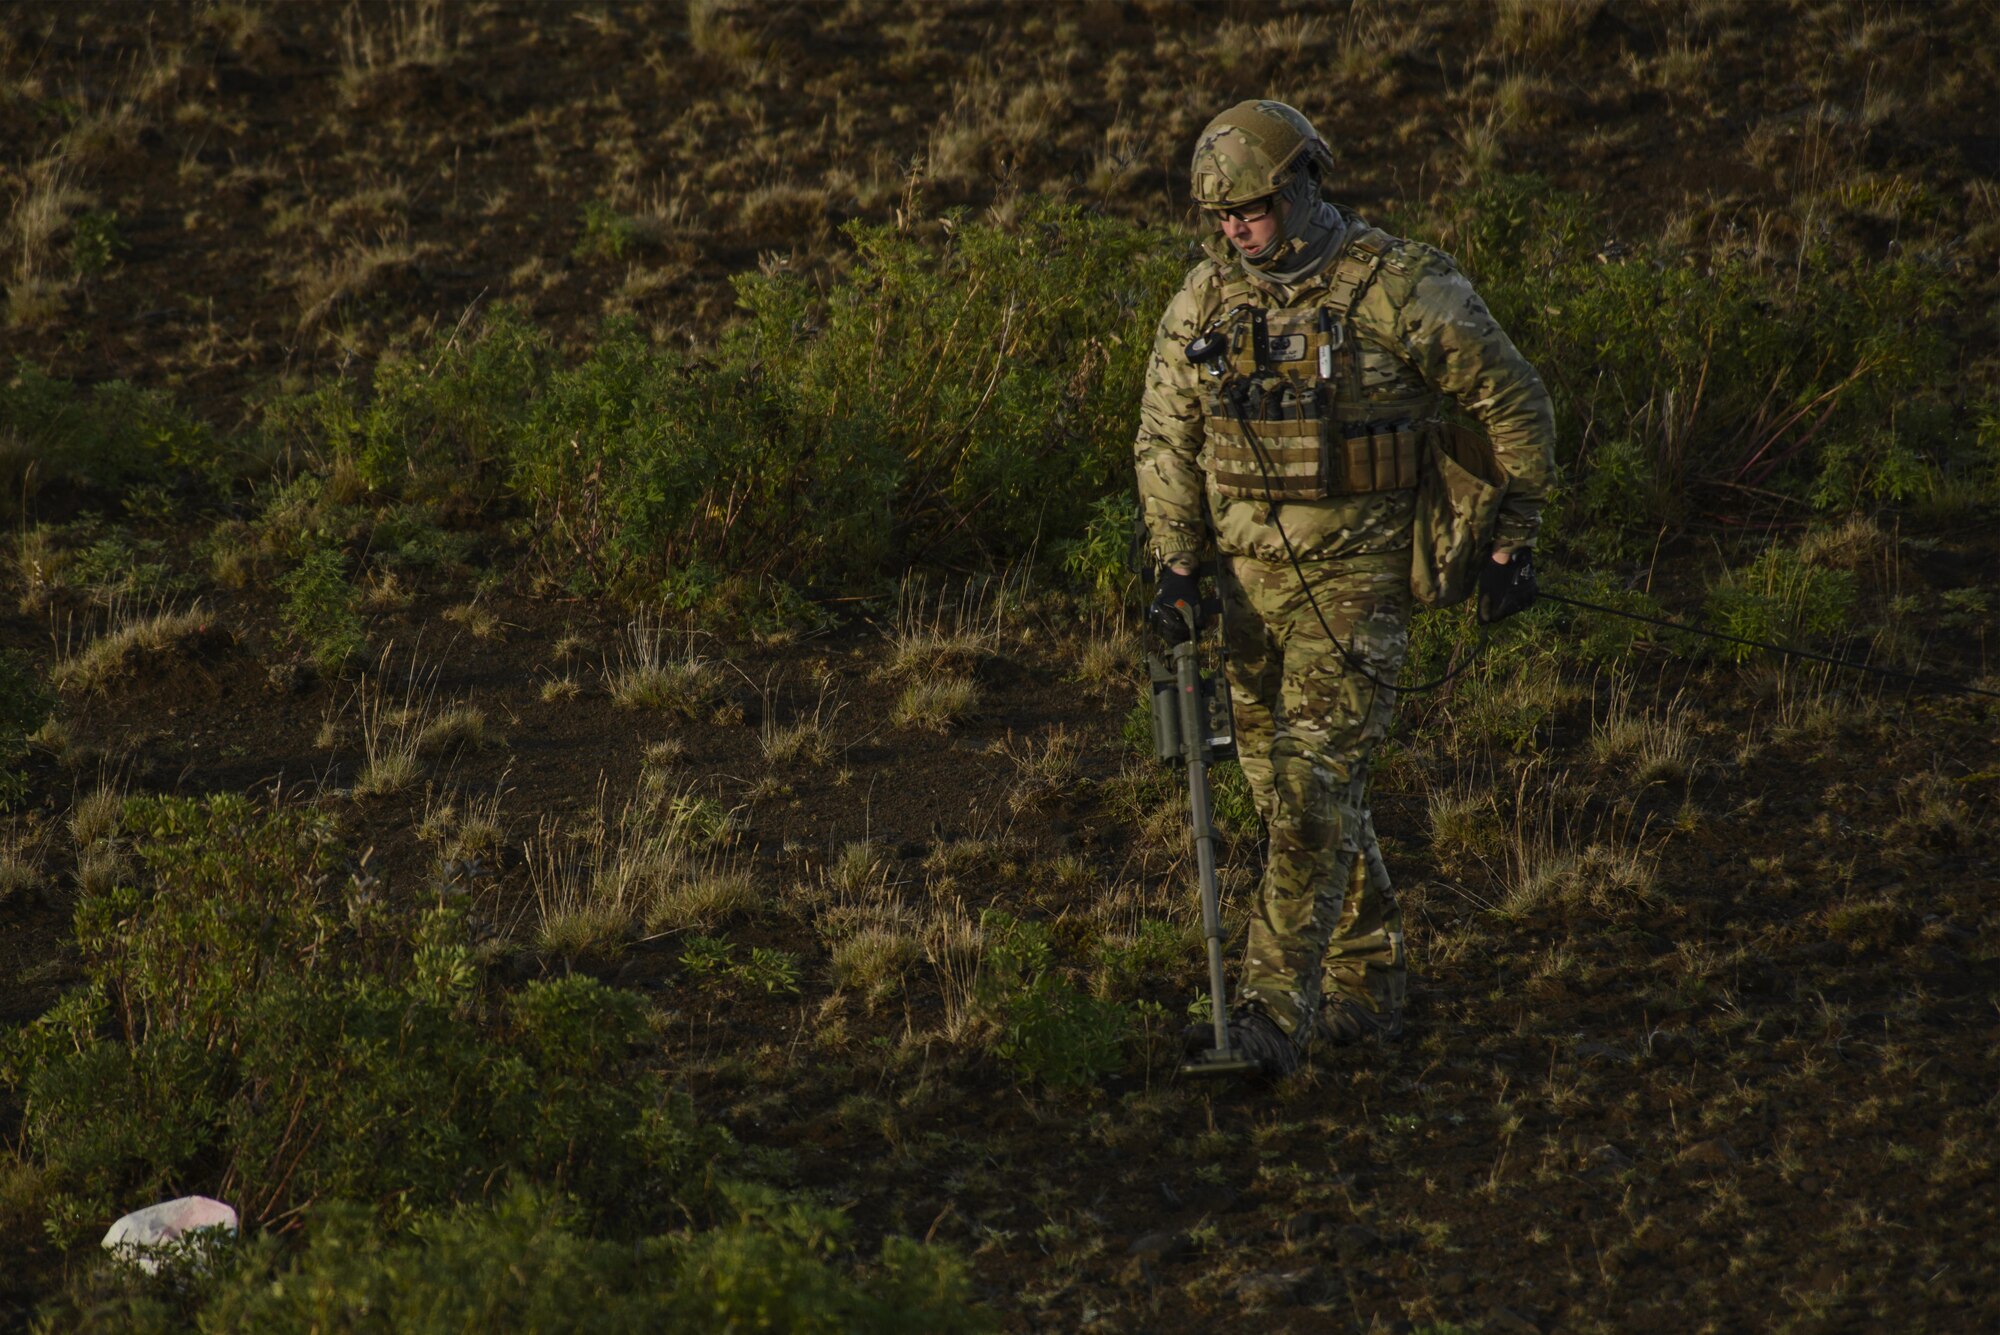 U.S. Air Force Tech. Sgt. Jason Umlauf, 52nd Civil Engineer Squadron explosive ordnance disposal craftsman, Spangdahlem Air Base, Germany, sweeps an area with a mine detector during Northern Challenge 16 exercise at Icelandic Coast Guard Keflavik Facility, Iceland, Sept. 19, 2016. The 52nd EOD, provides an operational explosive ordnance disposal capability to locate, identify, render safe, recover, field evaluate and dispose of all explosive ordnance. (U.S. Air Force photo by Staff Sgt. Jonathan Snyder)